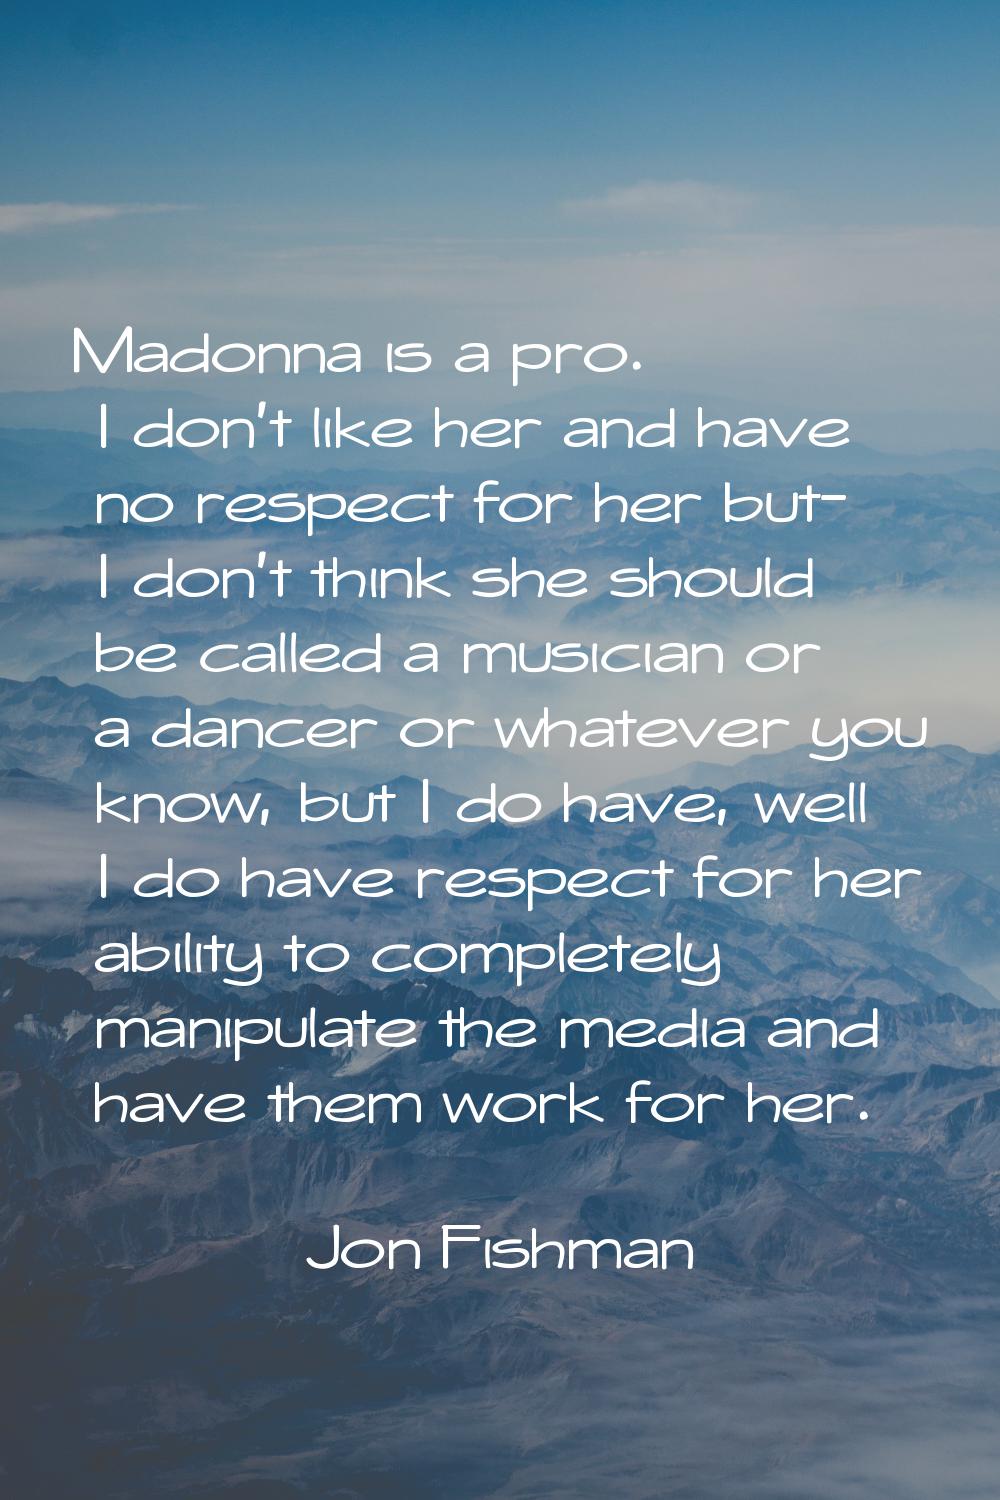 Madonna is a pro. I don't like her and have no respect for her but- I don't think she should be cal